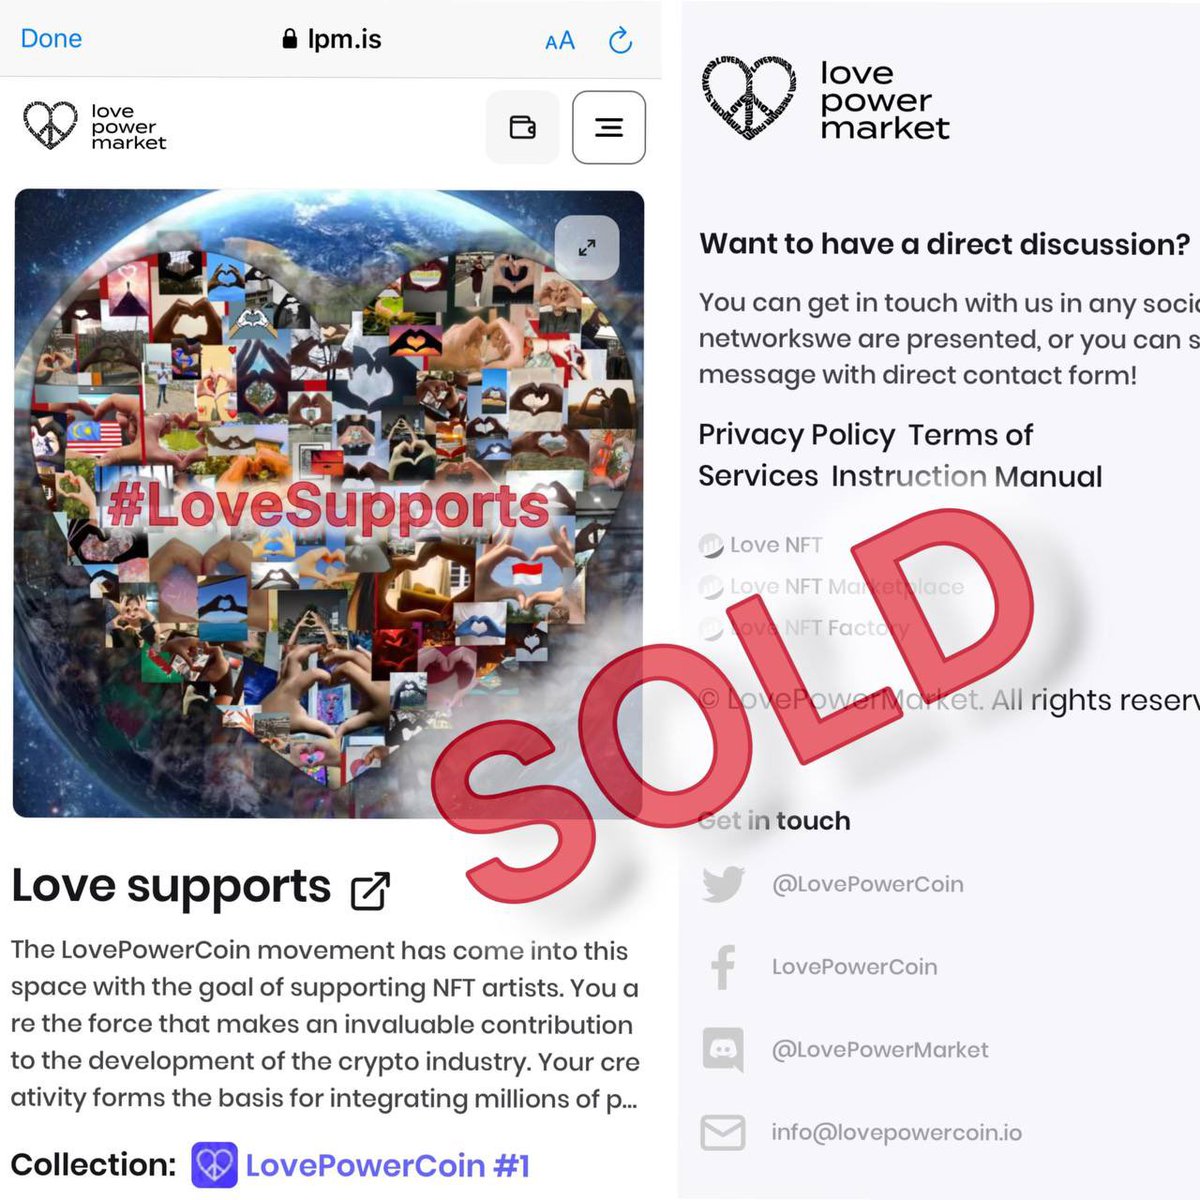 SOLD! This is the first NFT sale on LovePowerMarket marketplace 🔥🔥🔥 All proceeds from the sale will be directed to the LovePowerCoin support wave! You know what to do. List your NFT: lpm.is #LoveSupports ❤️💫✨